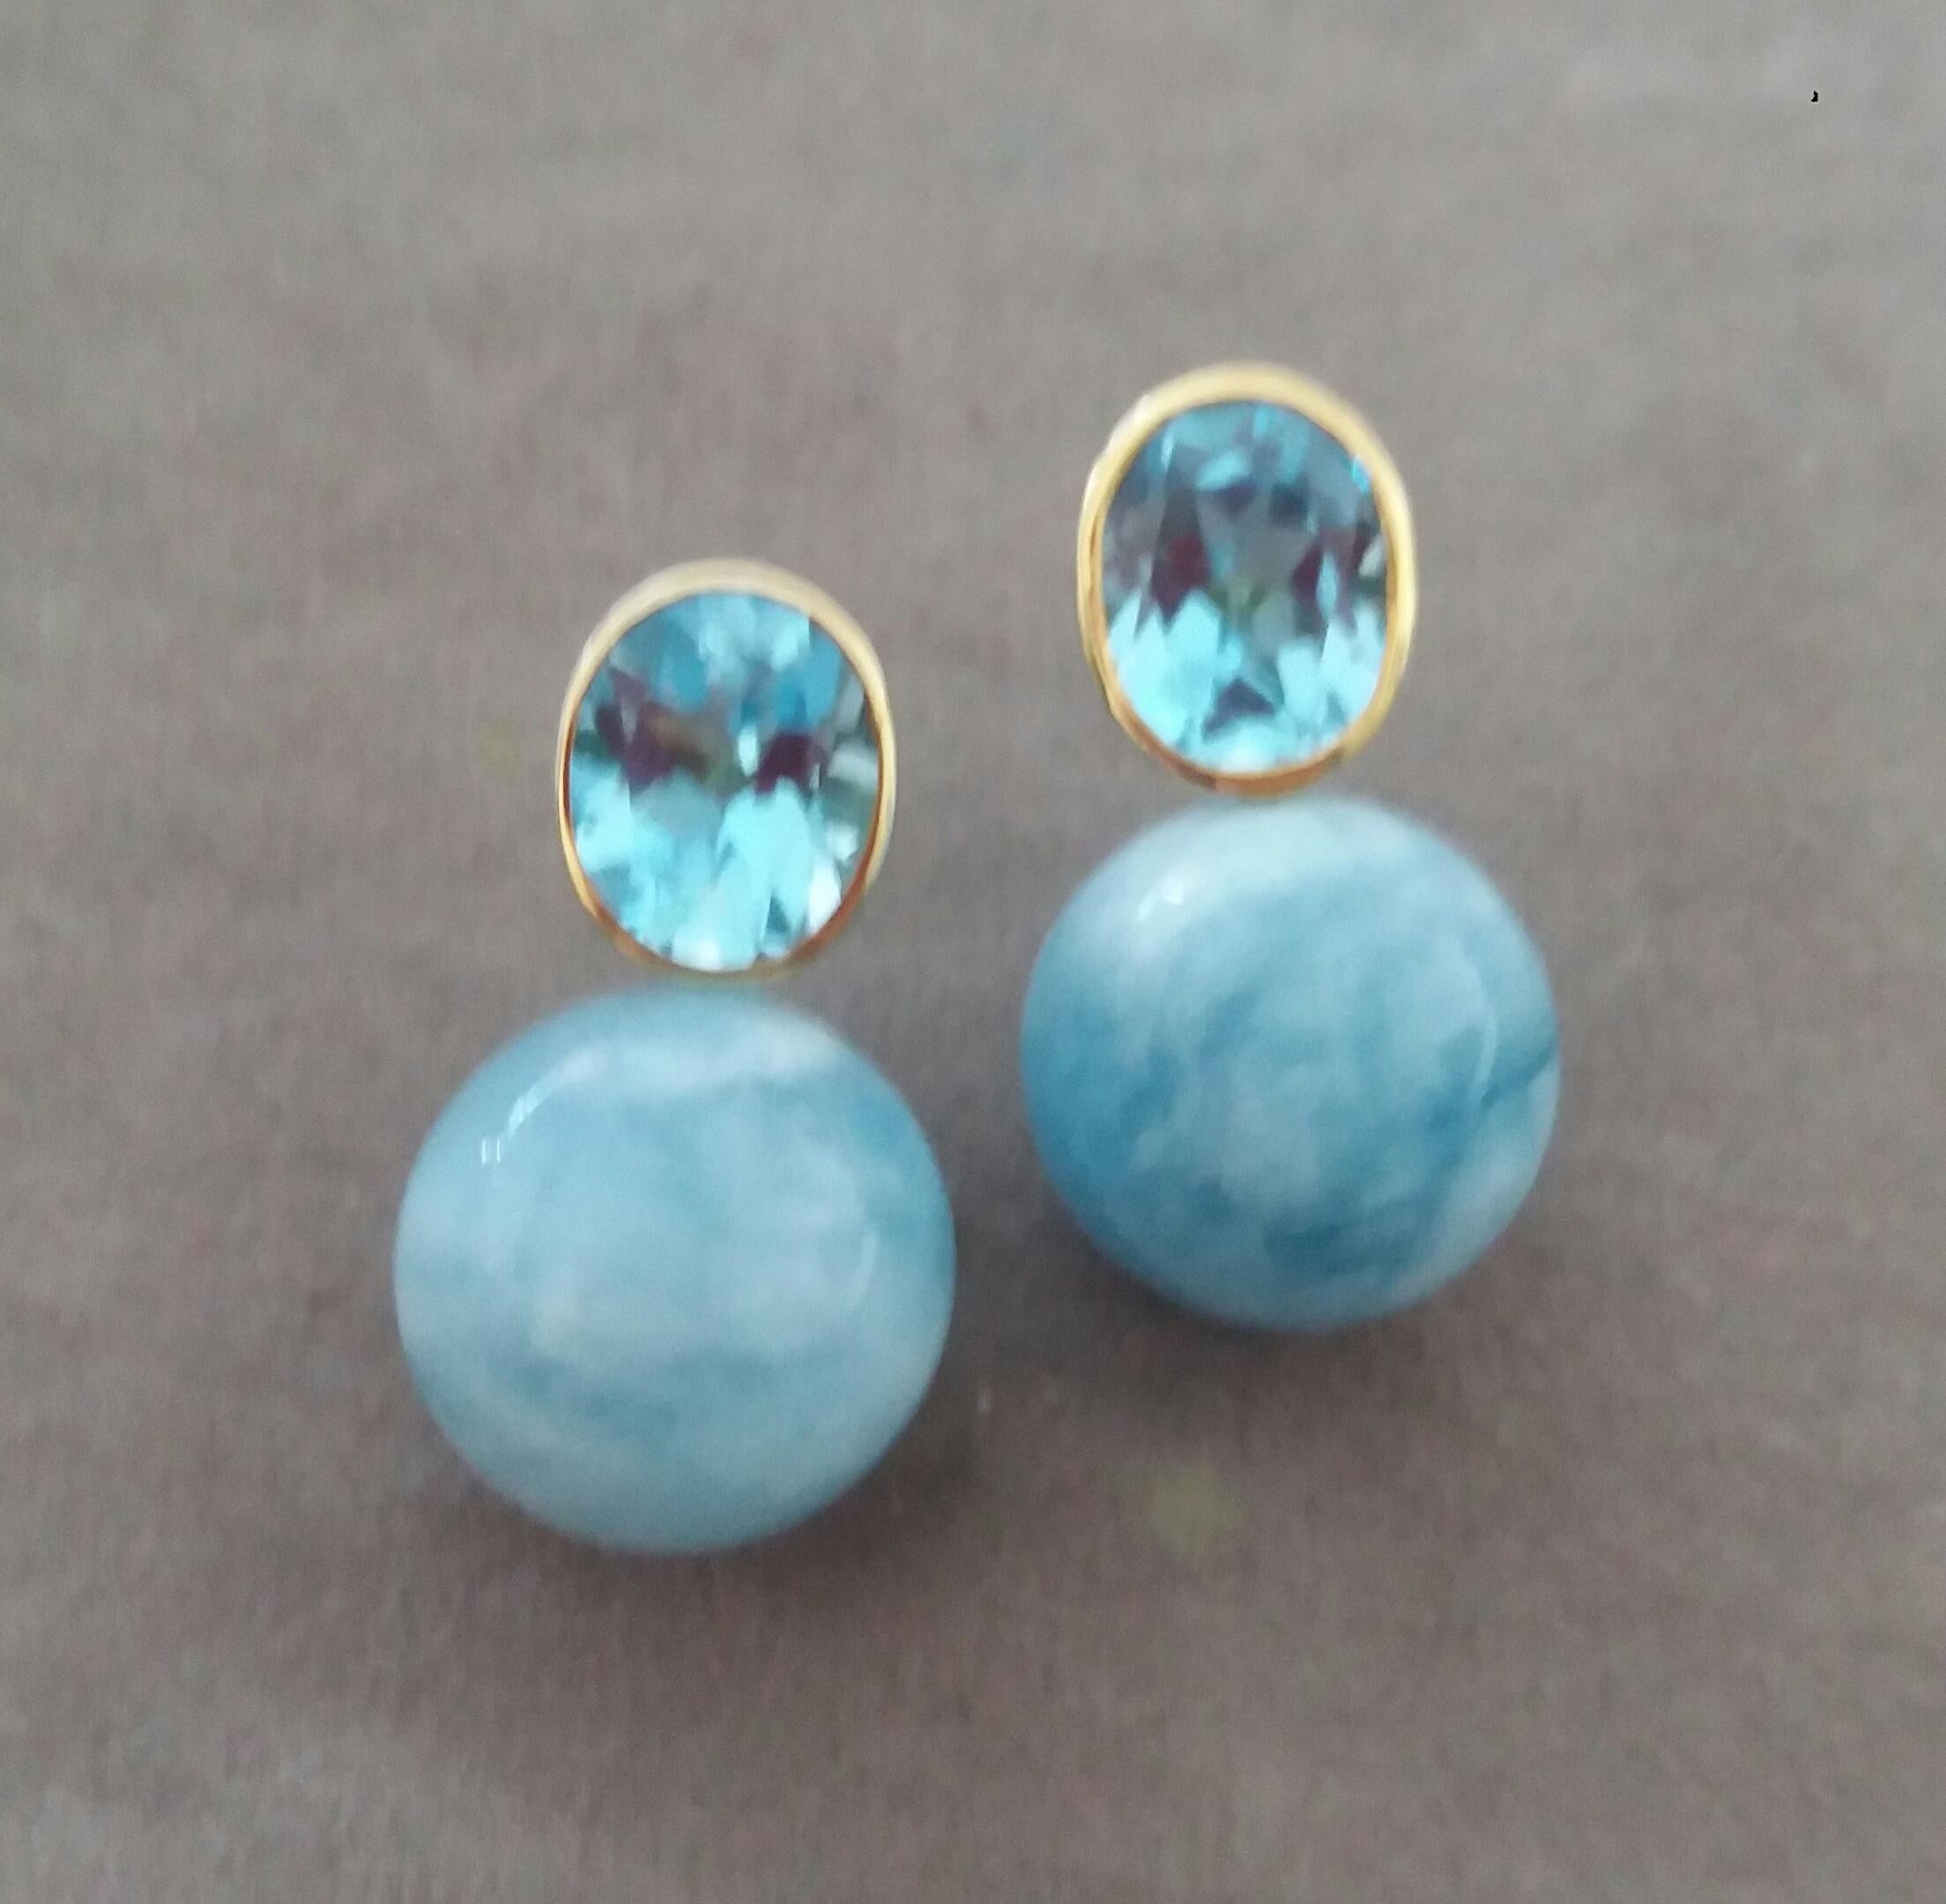 Mixed Cut Oval Faceted Sky Blue Topaz 14k Gold Aquamarine Plain Round Beads Stud Earrings